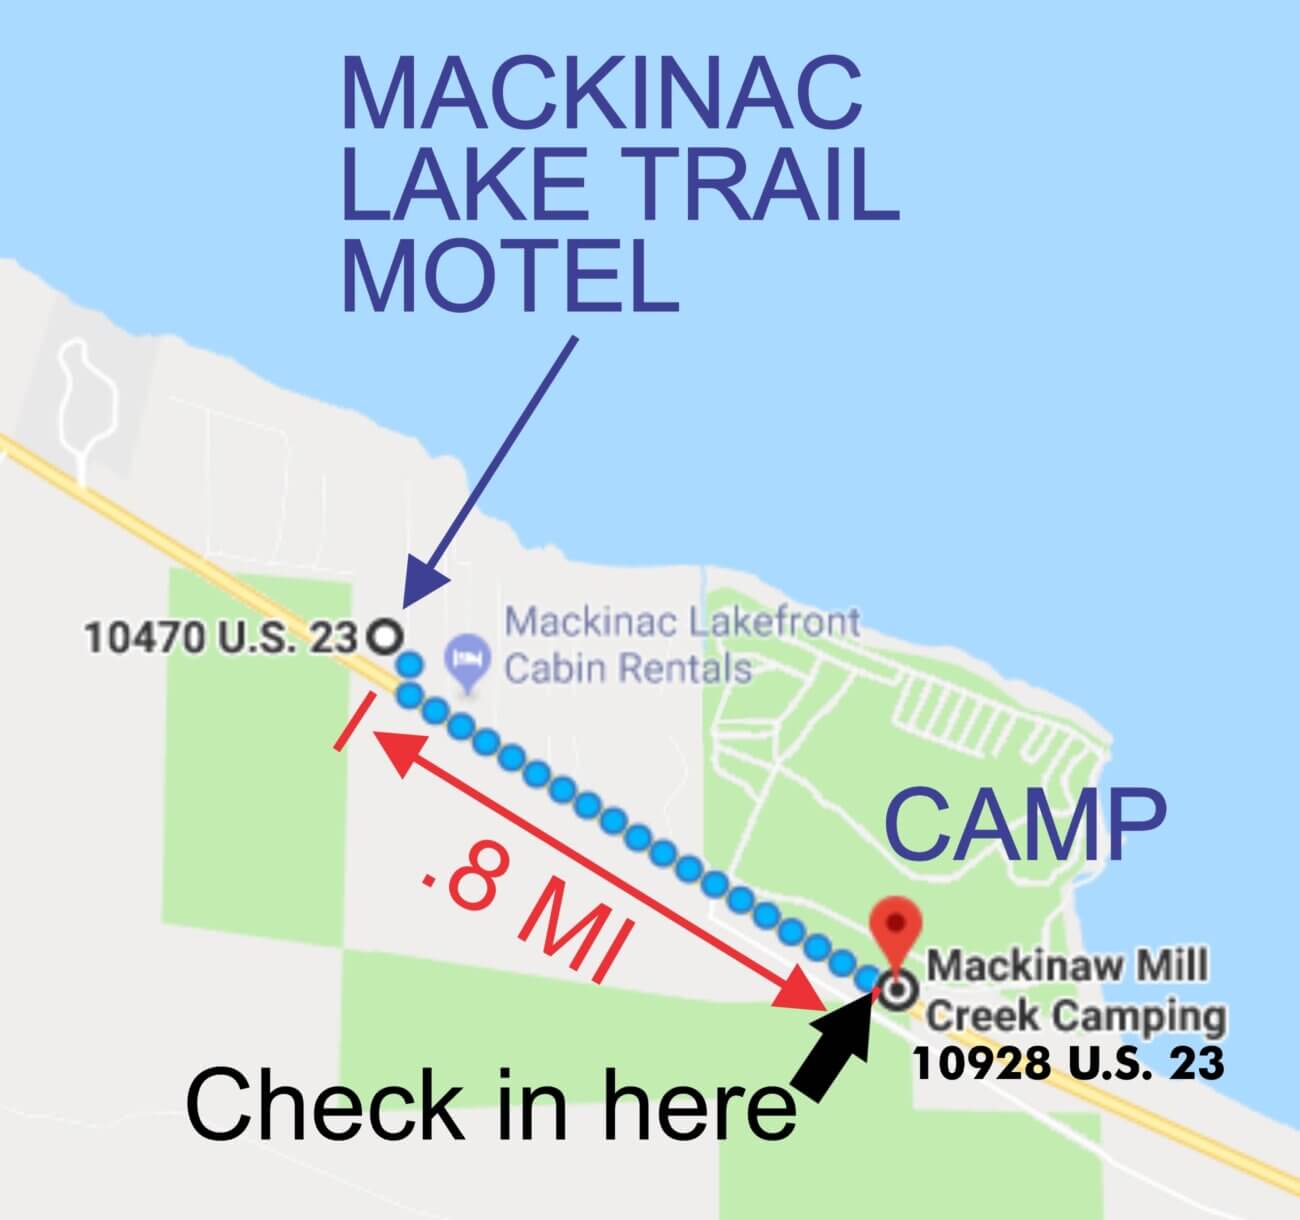 Check-in for the Mackinac Lake Trail Motel is at the main office of Mackinaw Mill Creek Camping (9730 US Hwy 23, Mackinaw City, MI 49701).